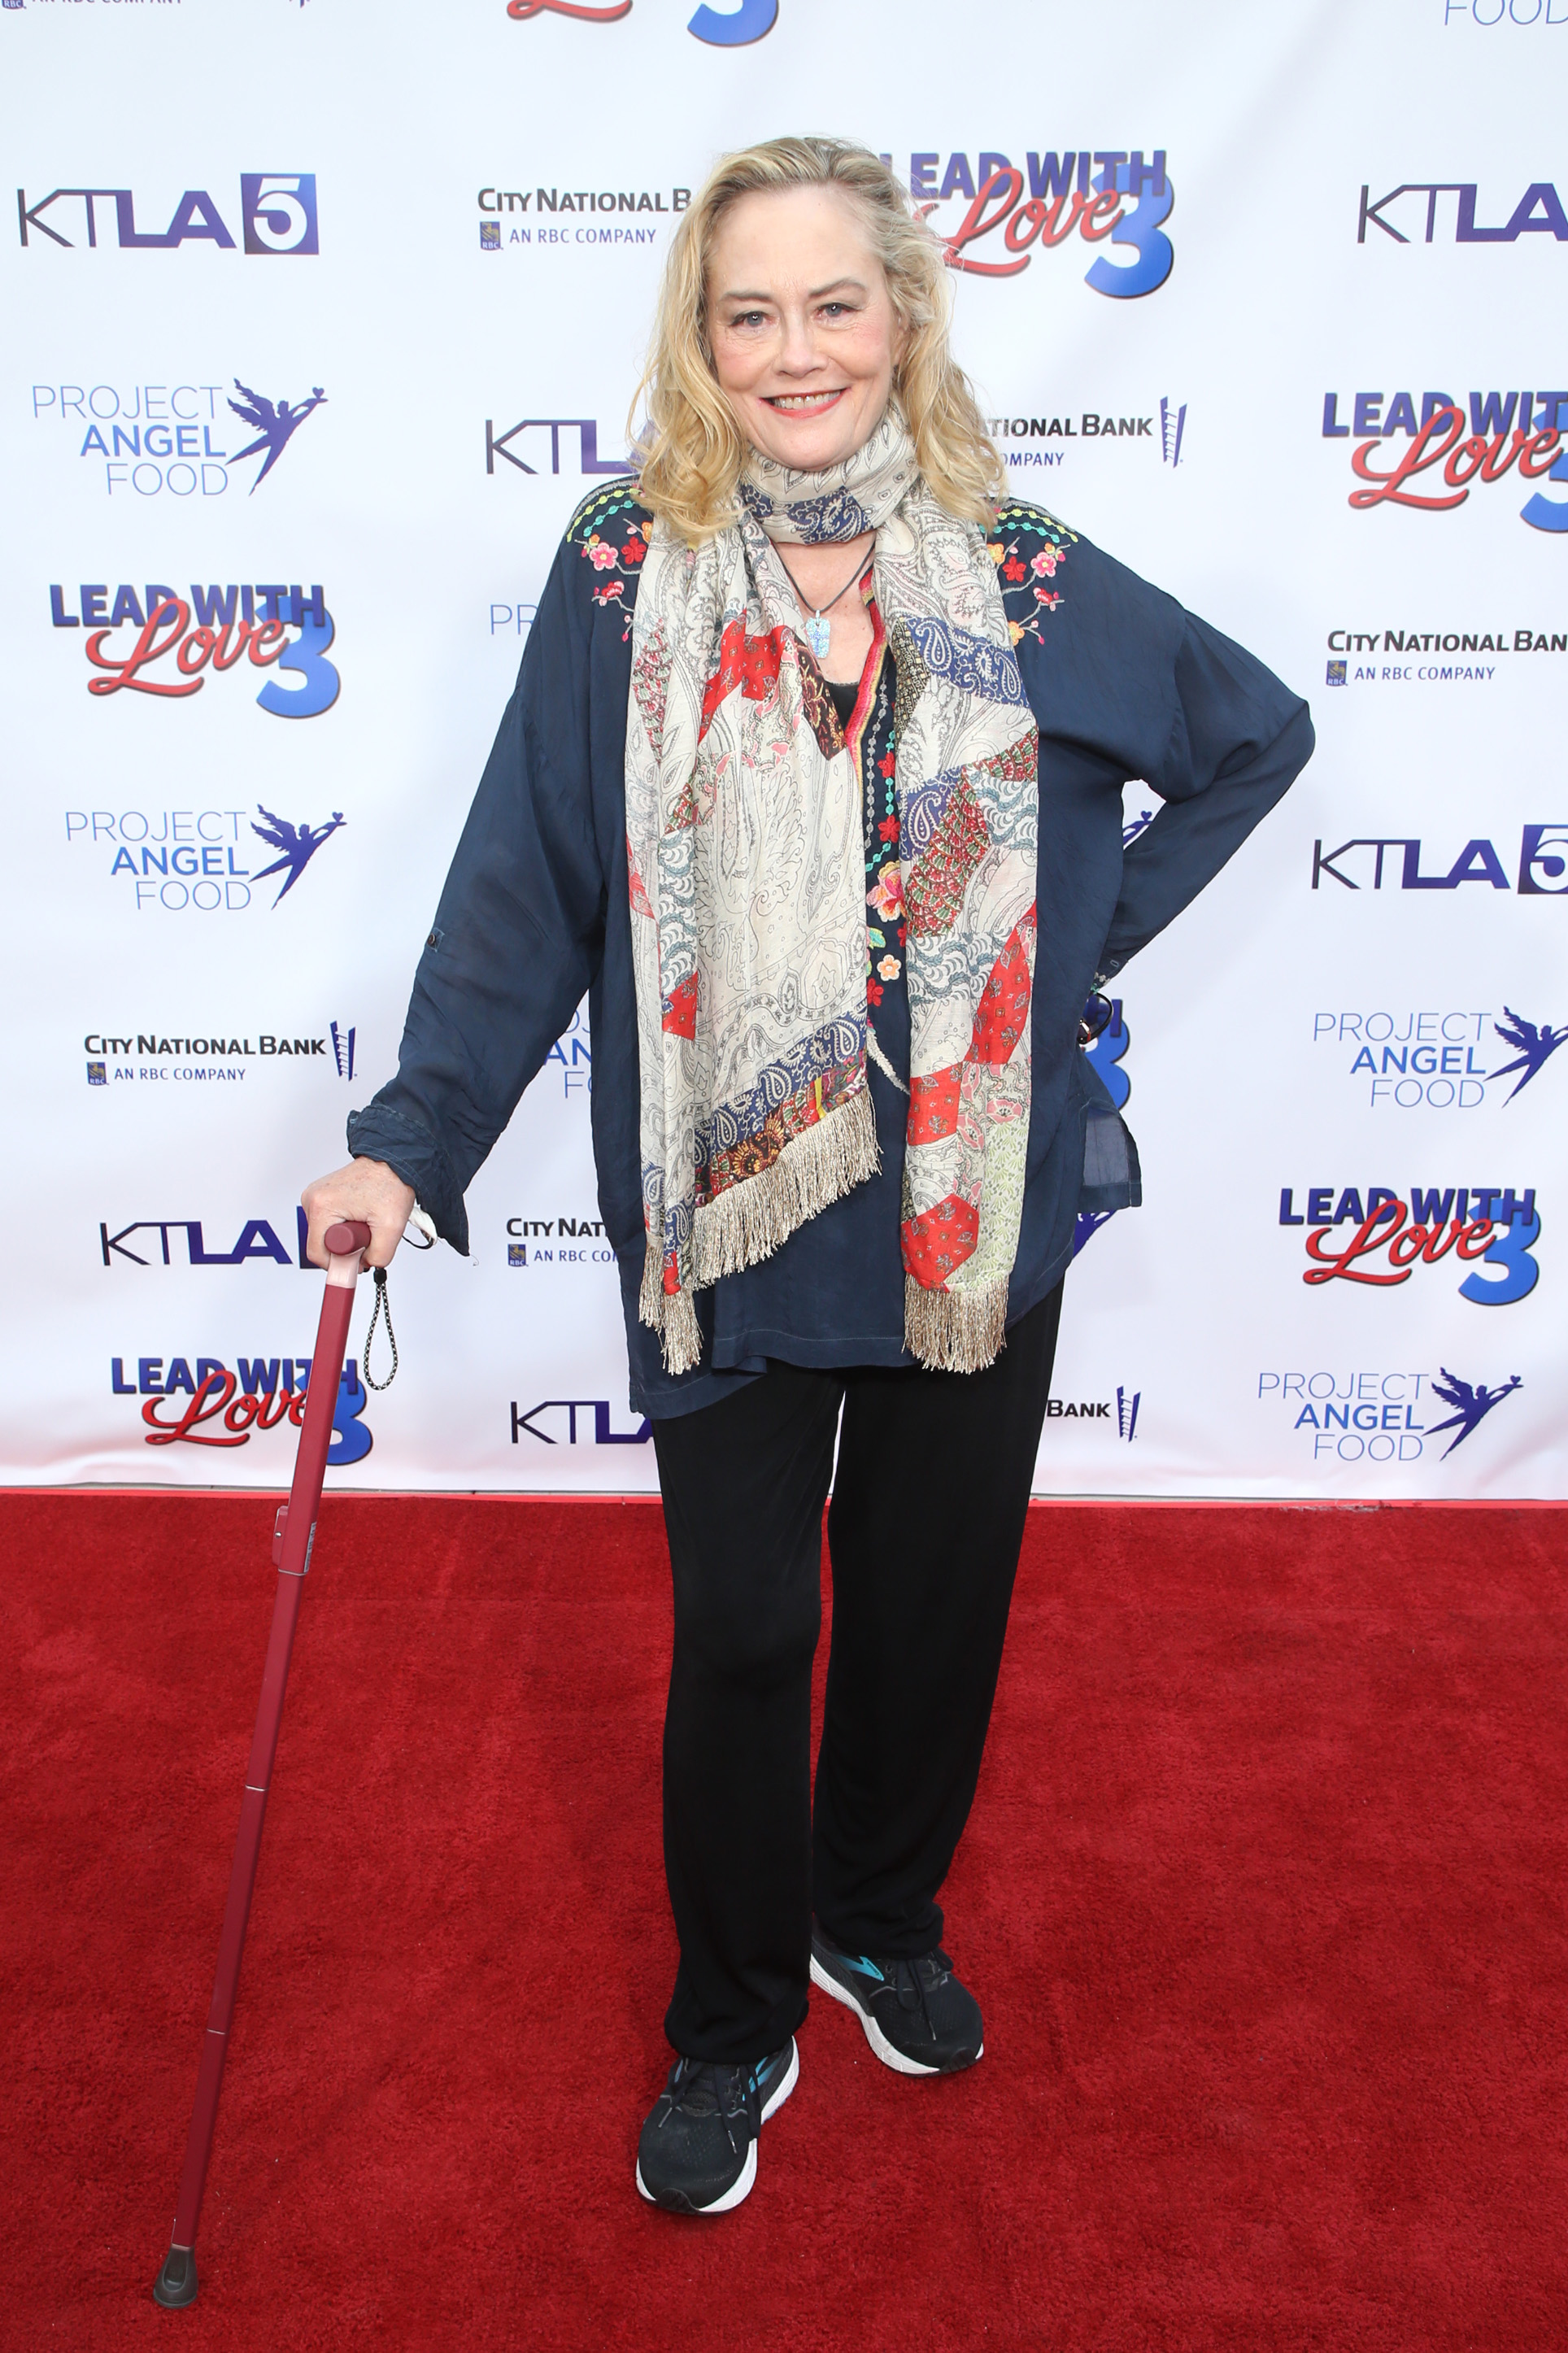 Cybill Shepherd attends Project Angel Food's Lead with Love 3, a Fundraising Special on KTLA on July 23, 2022, in Los Angeles, California. | Source: Getty Images